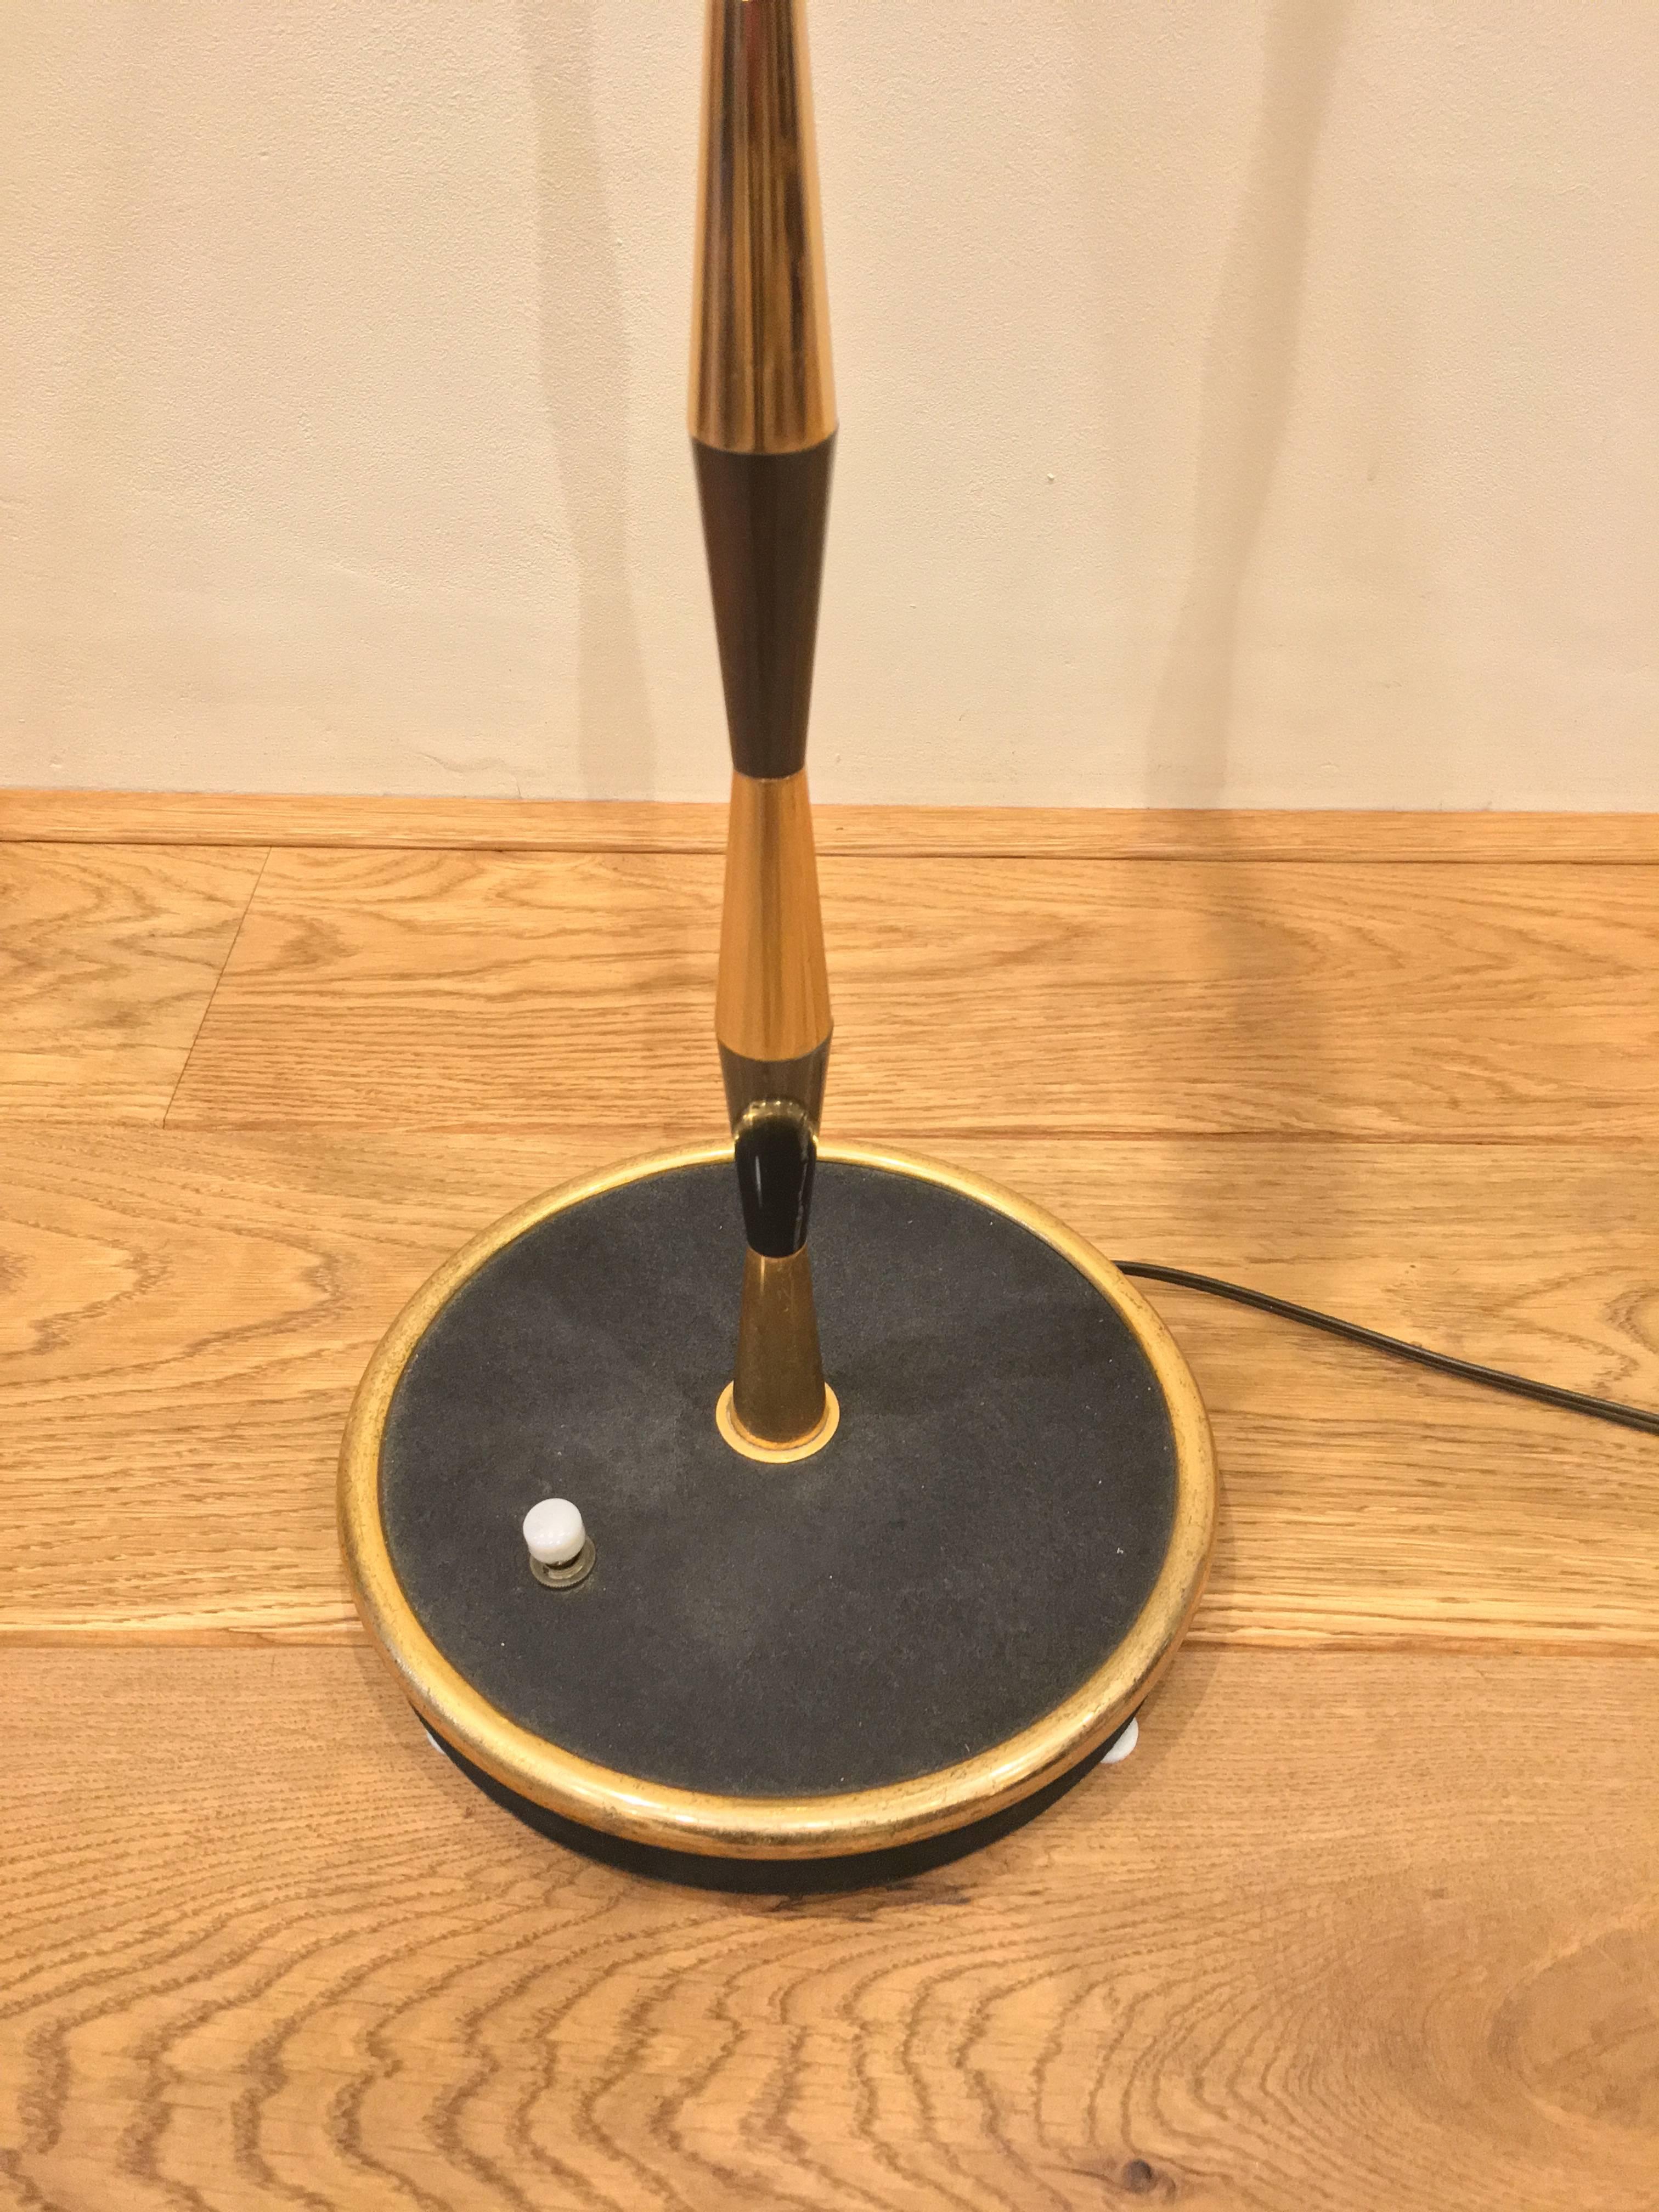 The floor lamp is made of cone shaped brass and canon de fusil metal elements. The foot is black metal circle by a brass ring. The original switch is still in use.